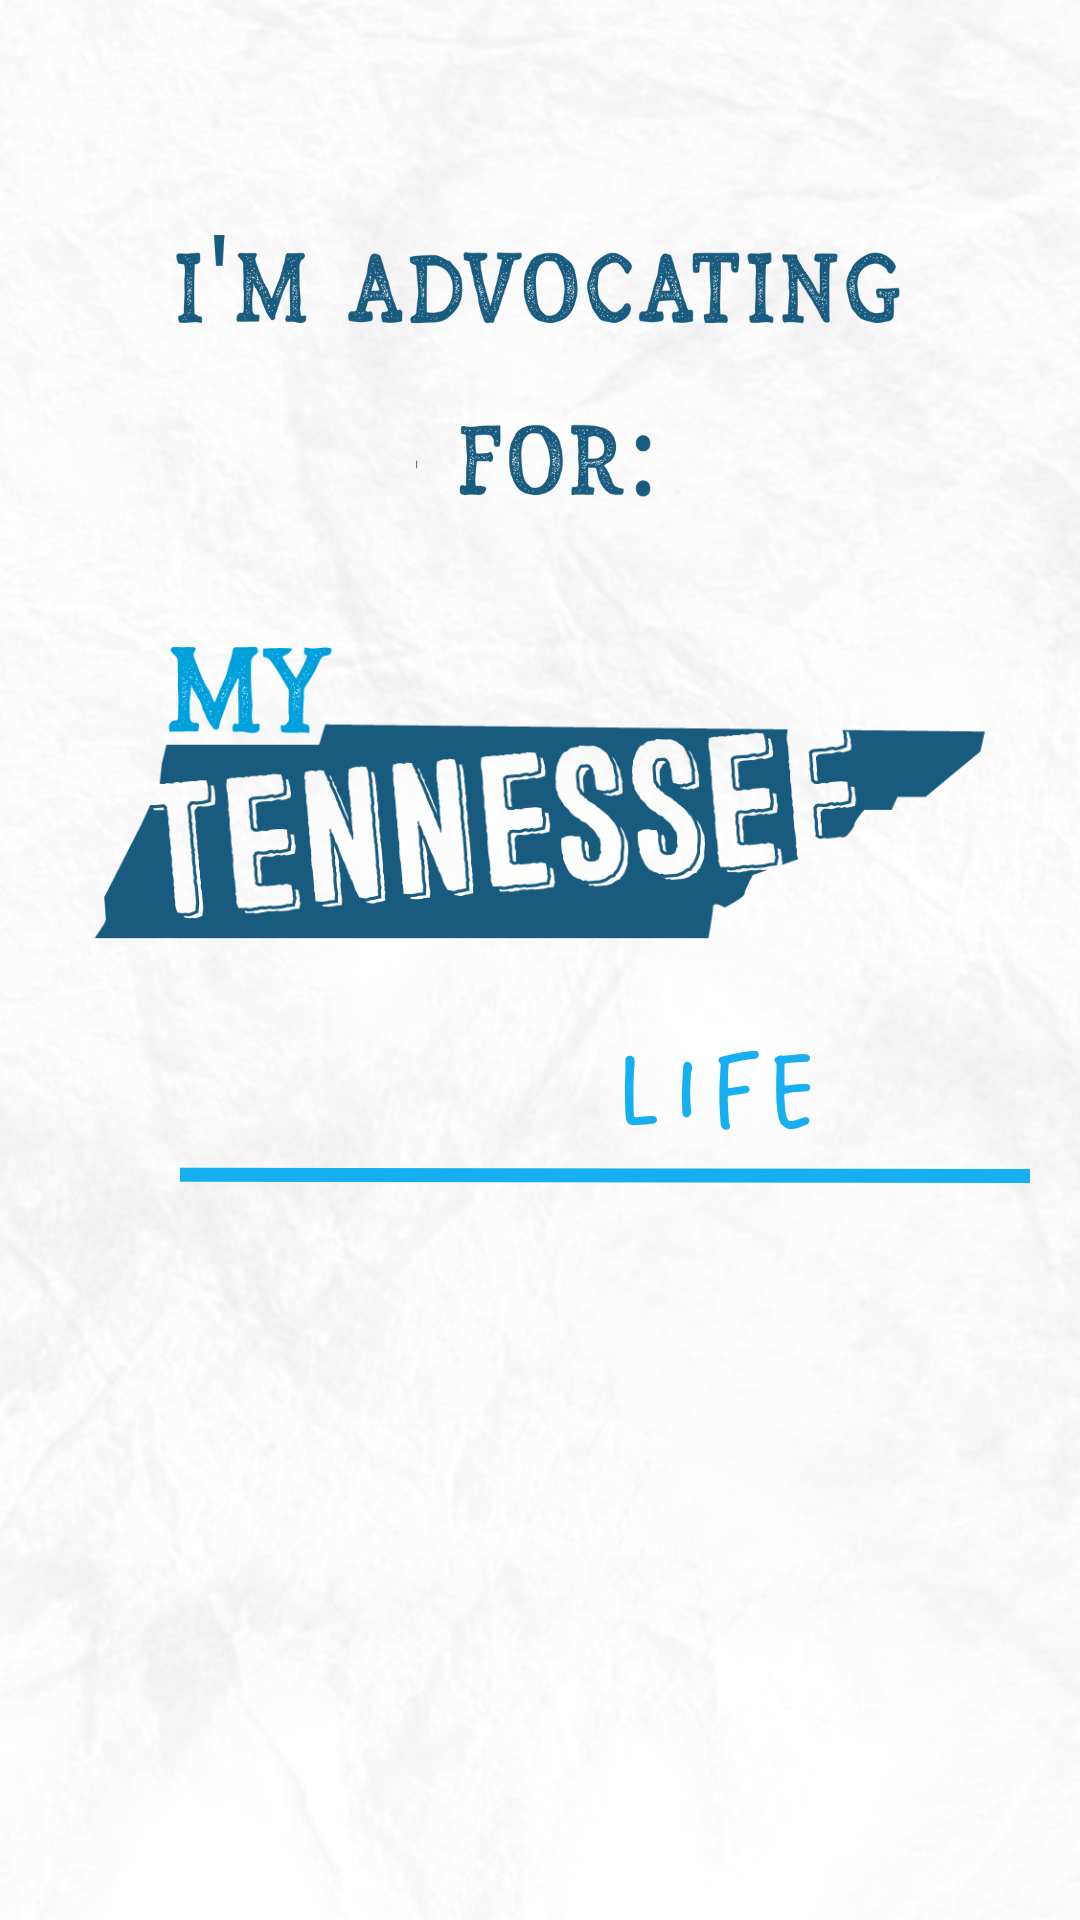 My Tennessee Life Social Media Template that reads " I'm advocating for my Tennessee life"